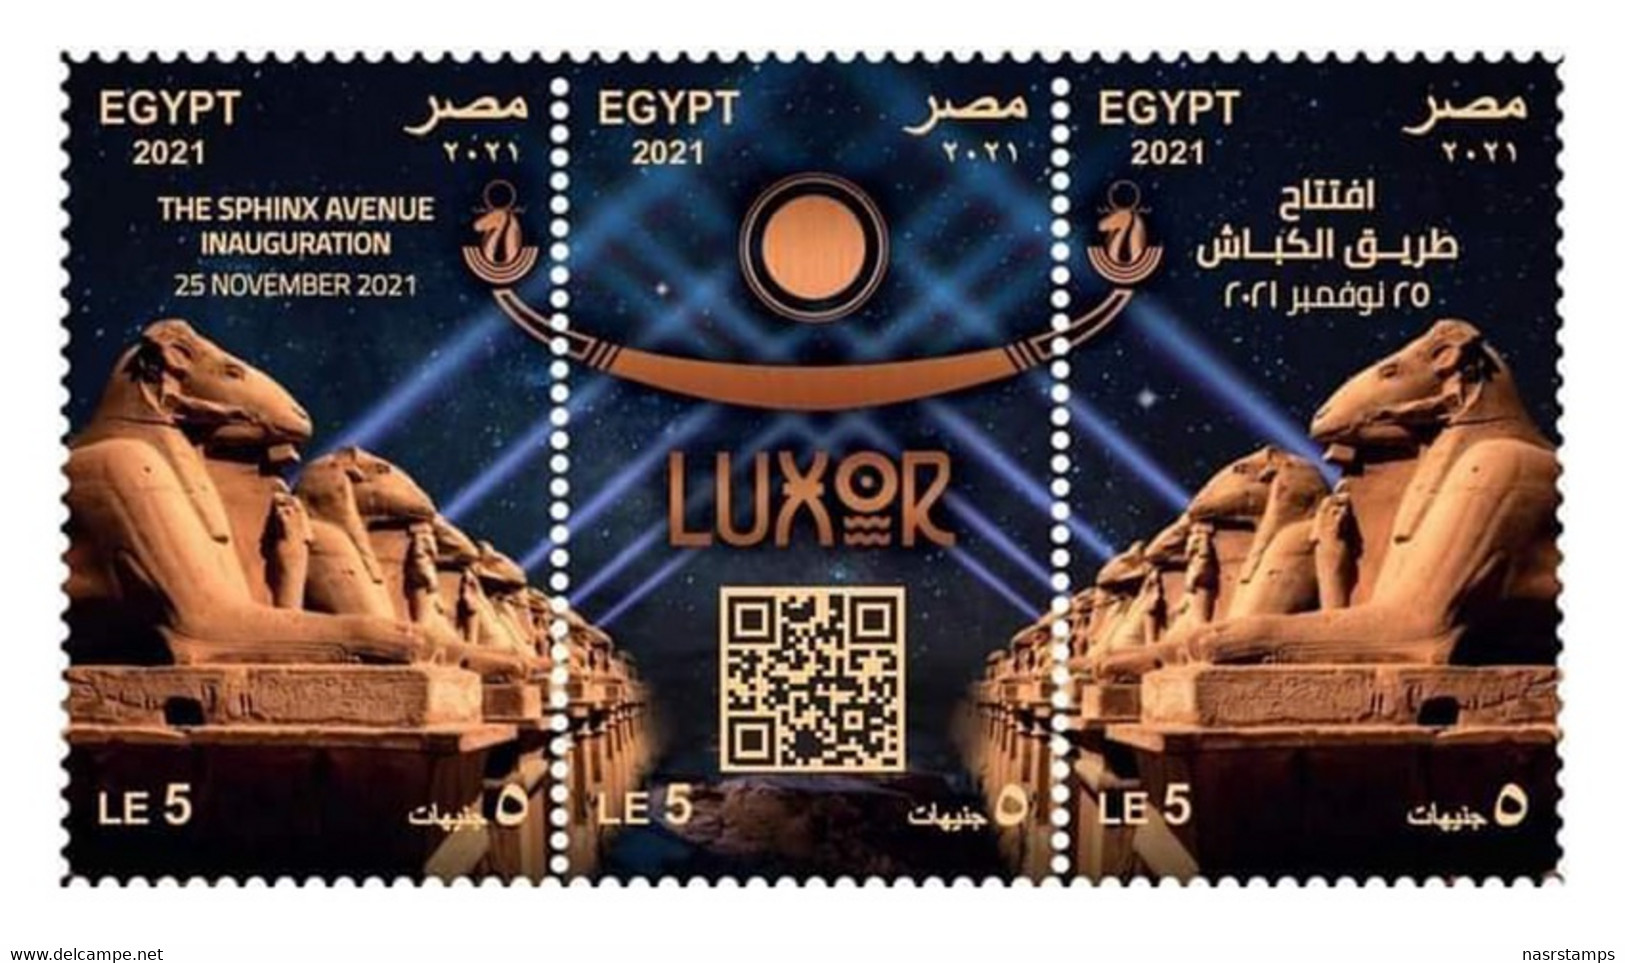 Egypt - 2021 - NEW - Complete Sheet - ( The Sphinx Avenue Inauguration - LUXOR ) - MNH** - Unused Stamps